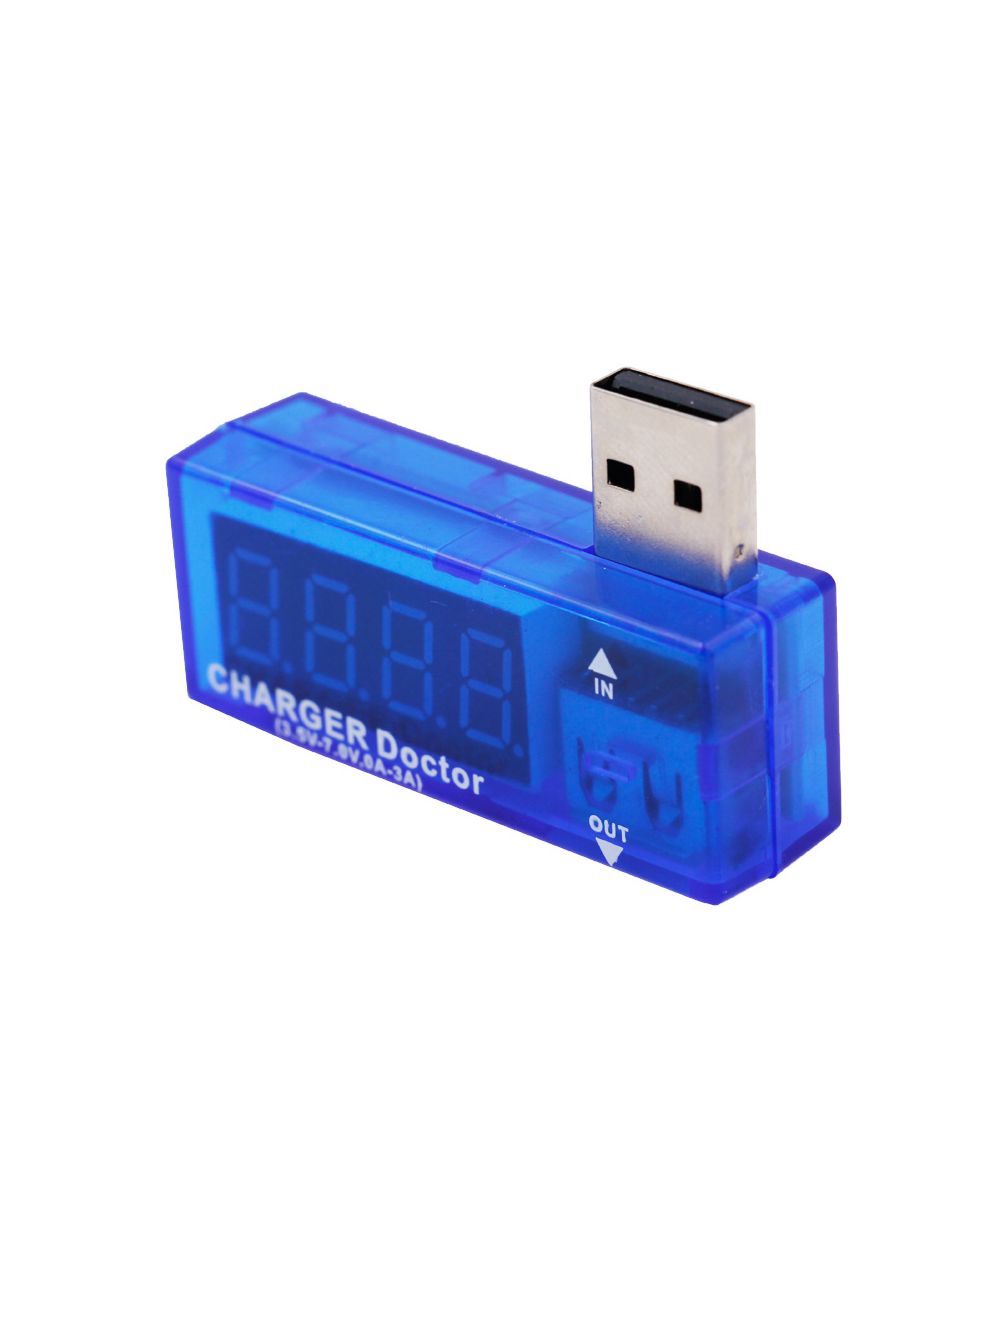 USB Charger Doctor Inline Current and Voltage Meter Tester -